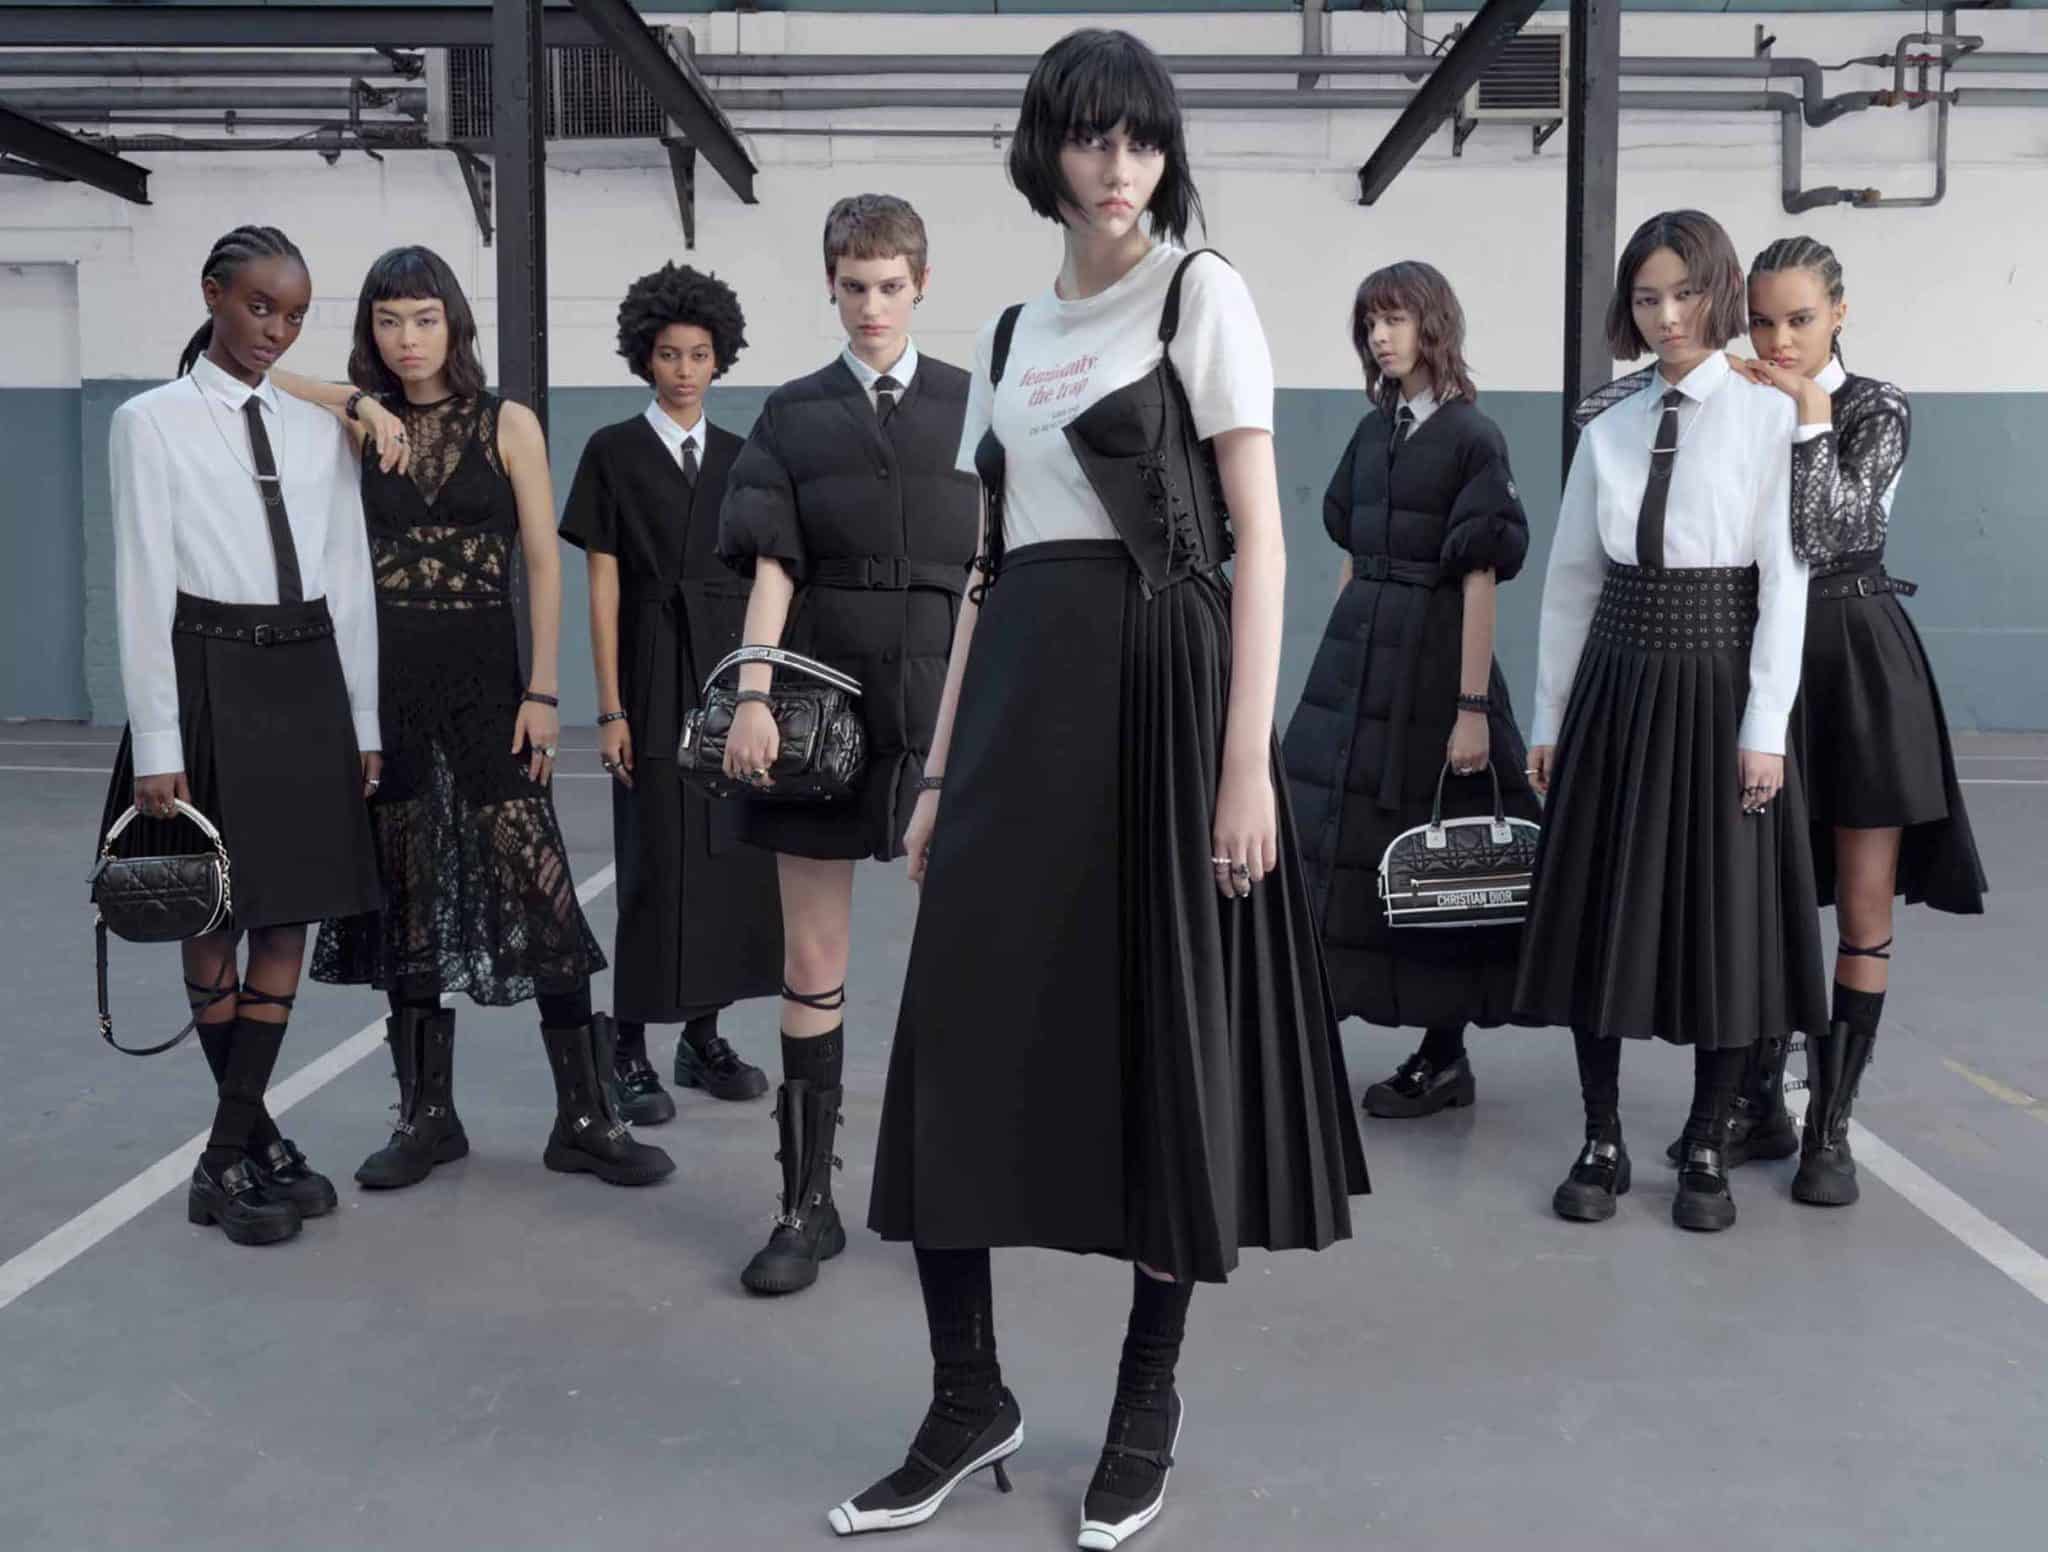 Dior's Fall 2022 collection